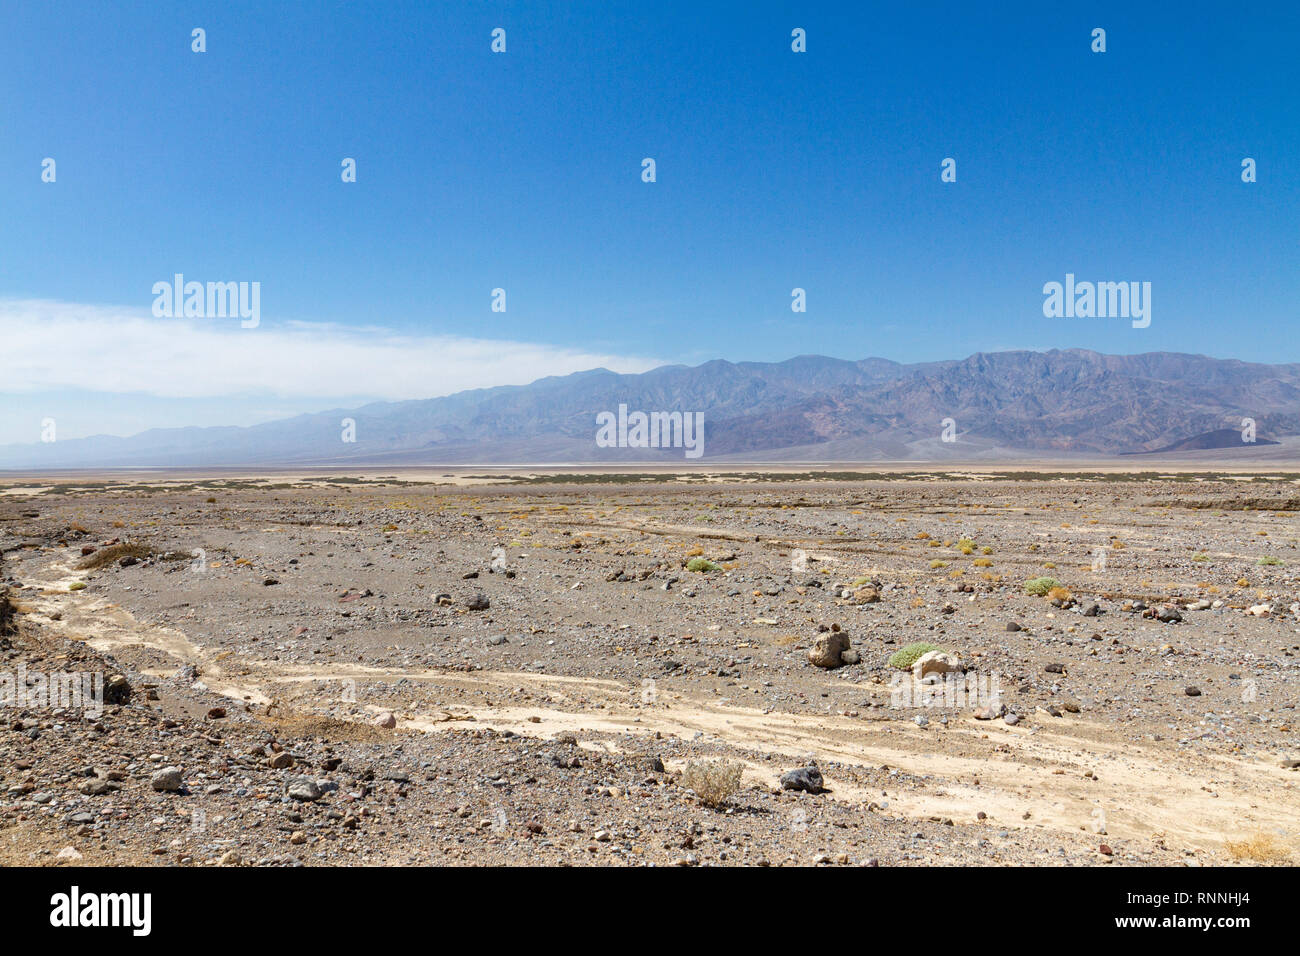 View across Death Valley from close to Furnace Creek, Death Valley National Park, California, United States. Stock Photo